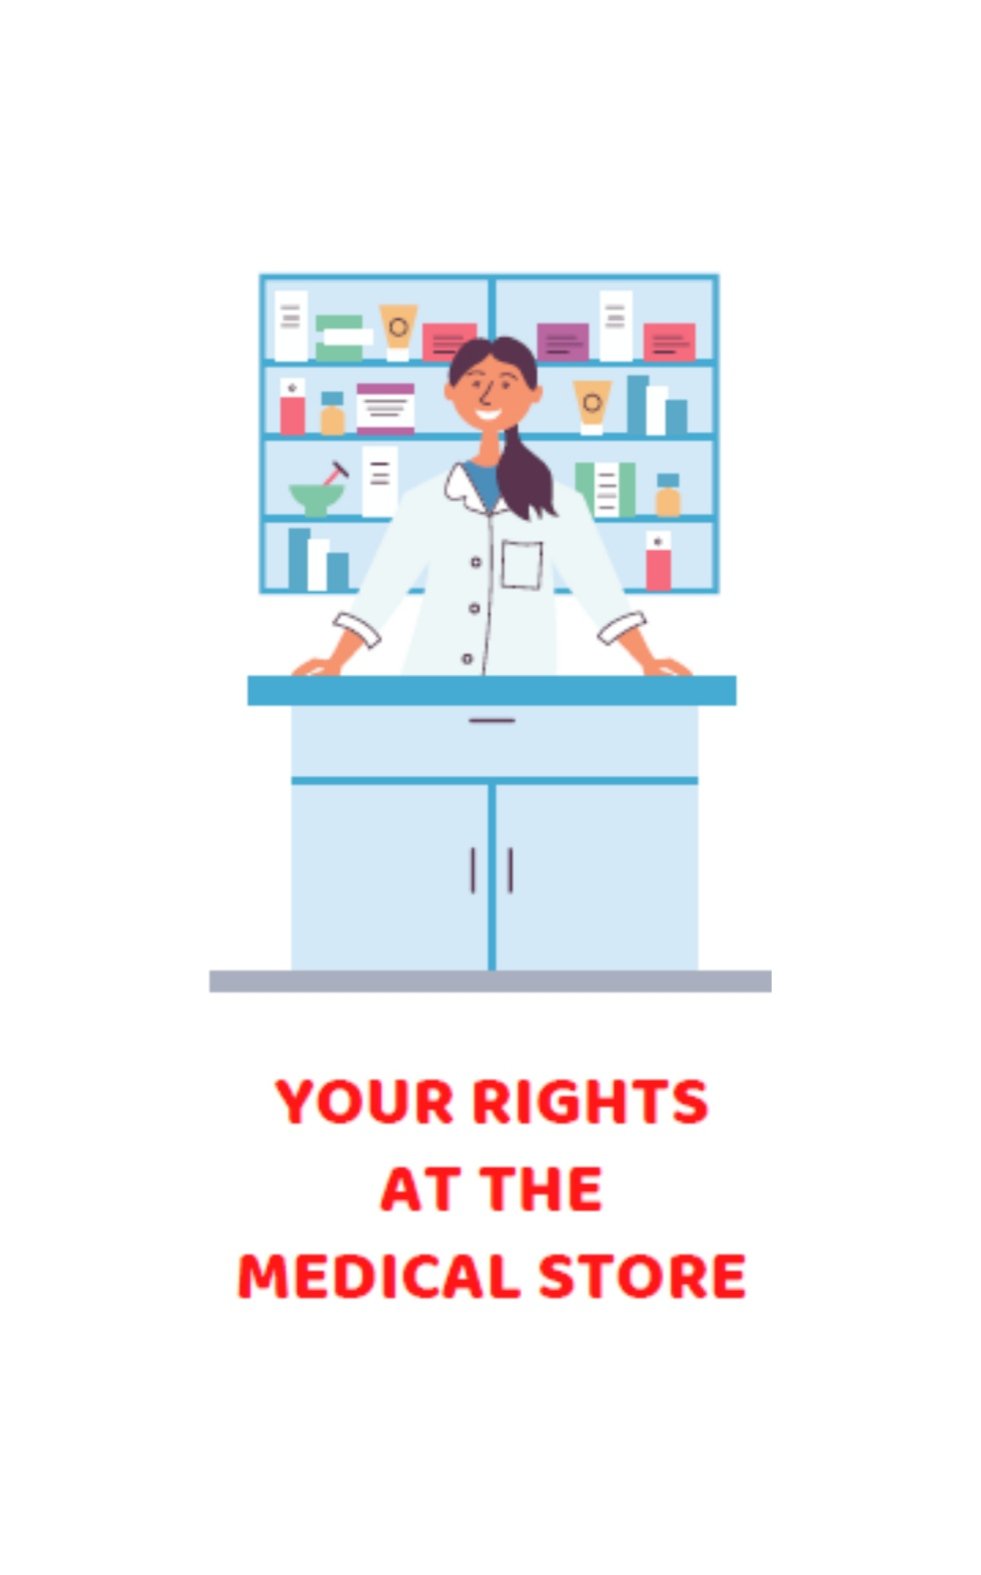 Your Rights at the Medical Store